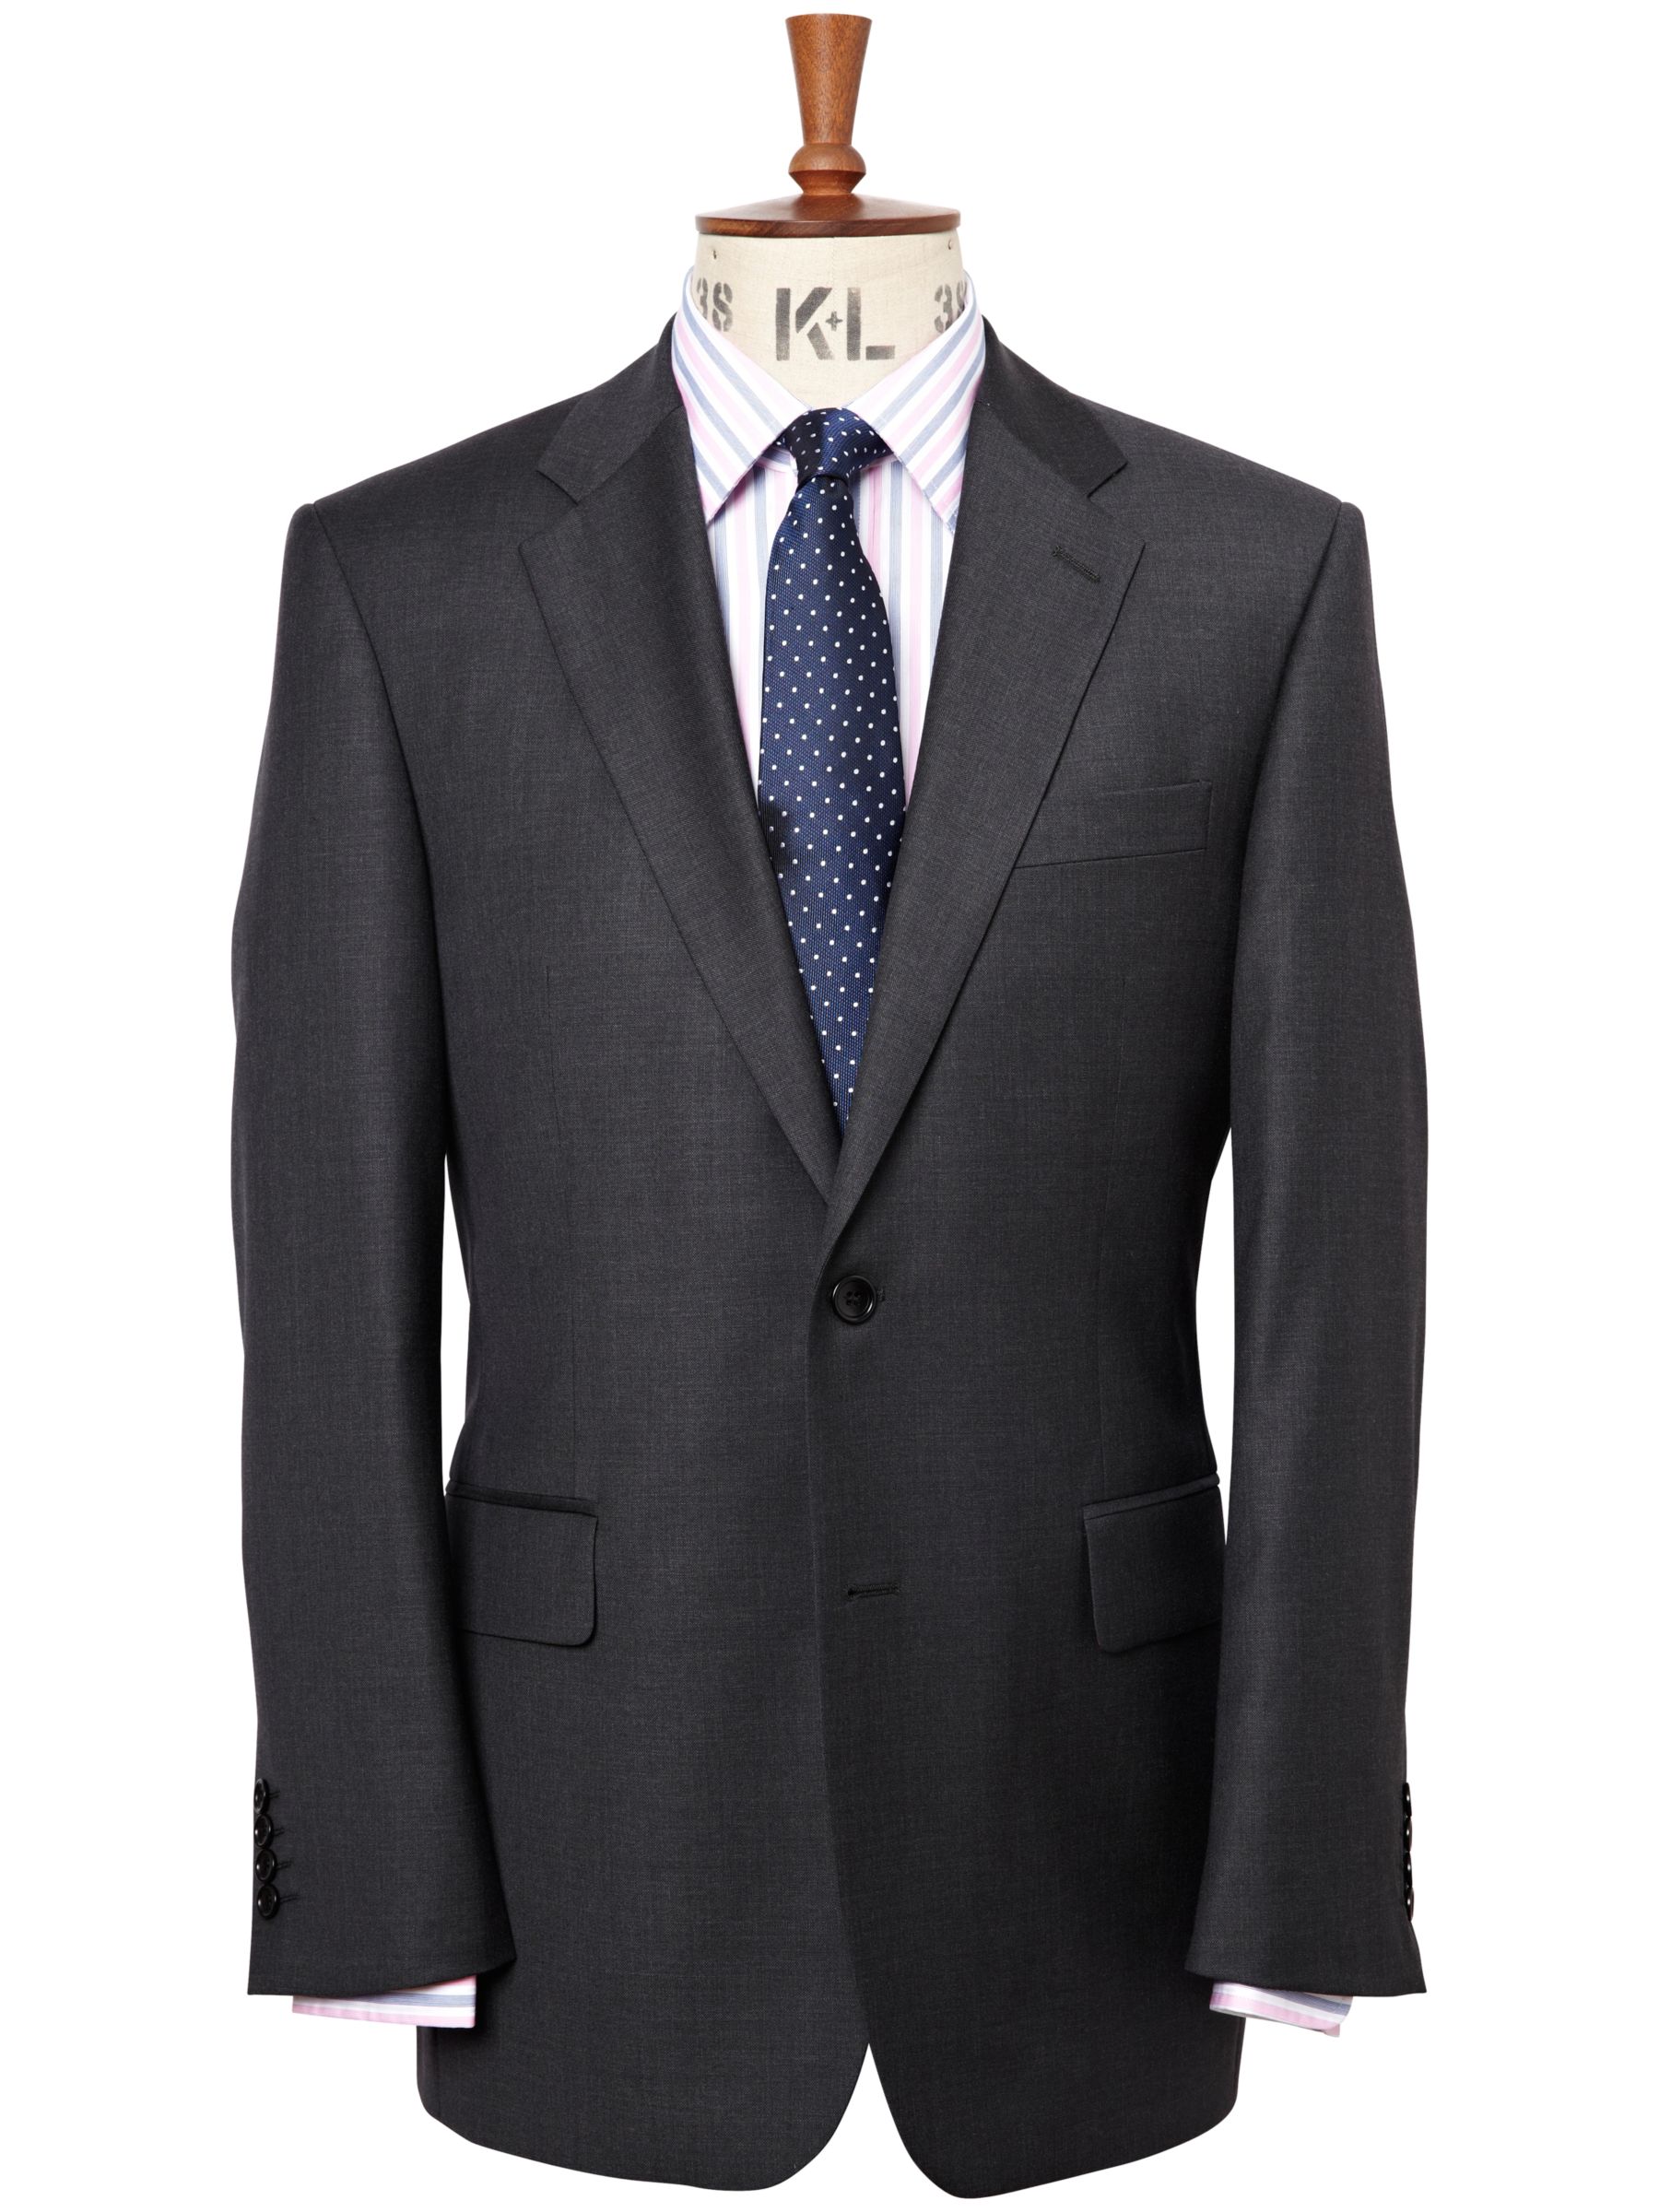 Chester by Chester Barrie Pick N Pick Suit Jacket, Charcoal at John Lewis